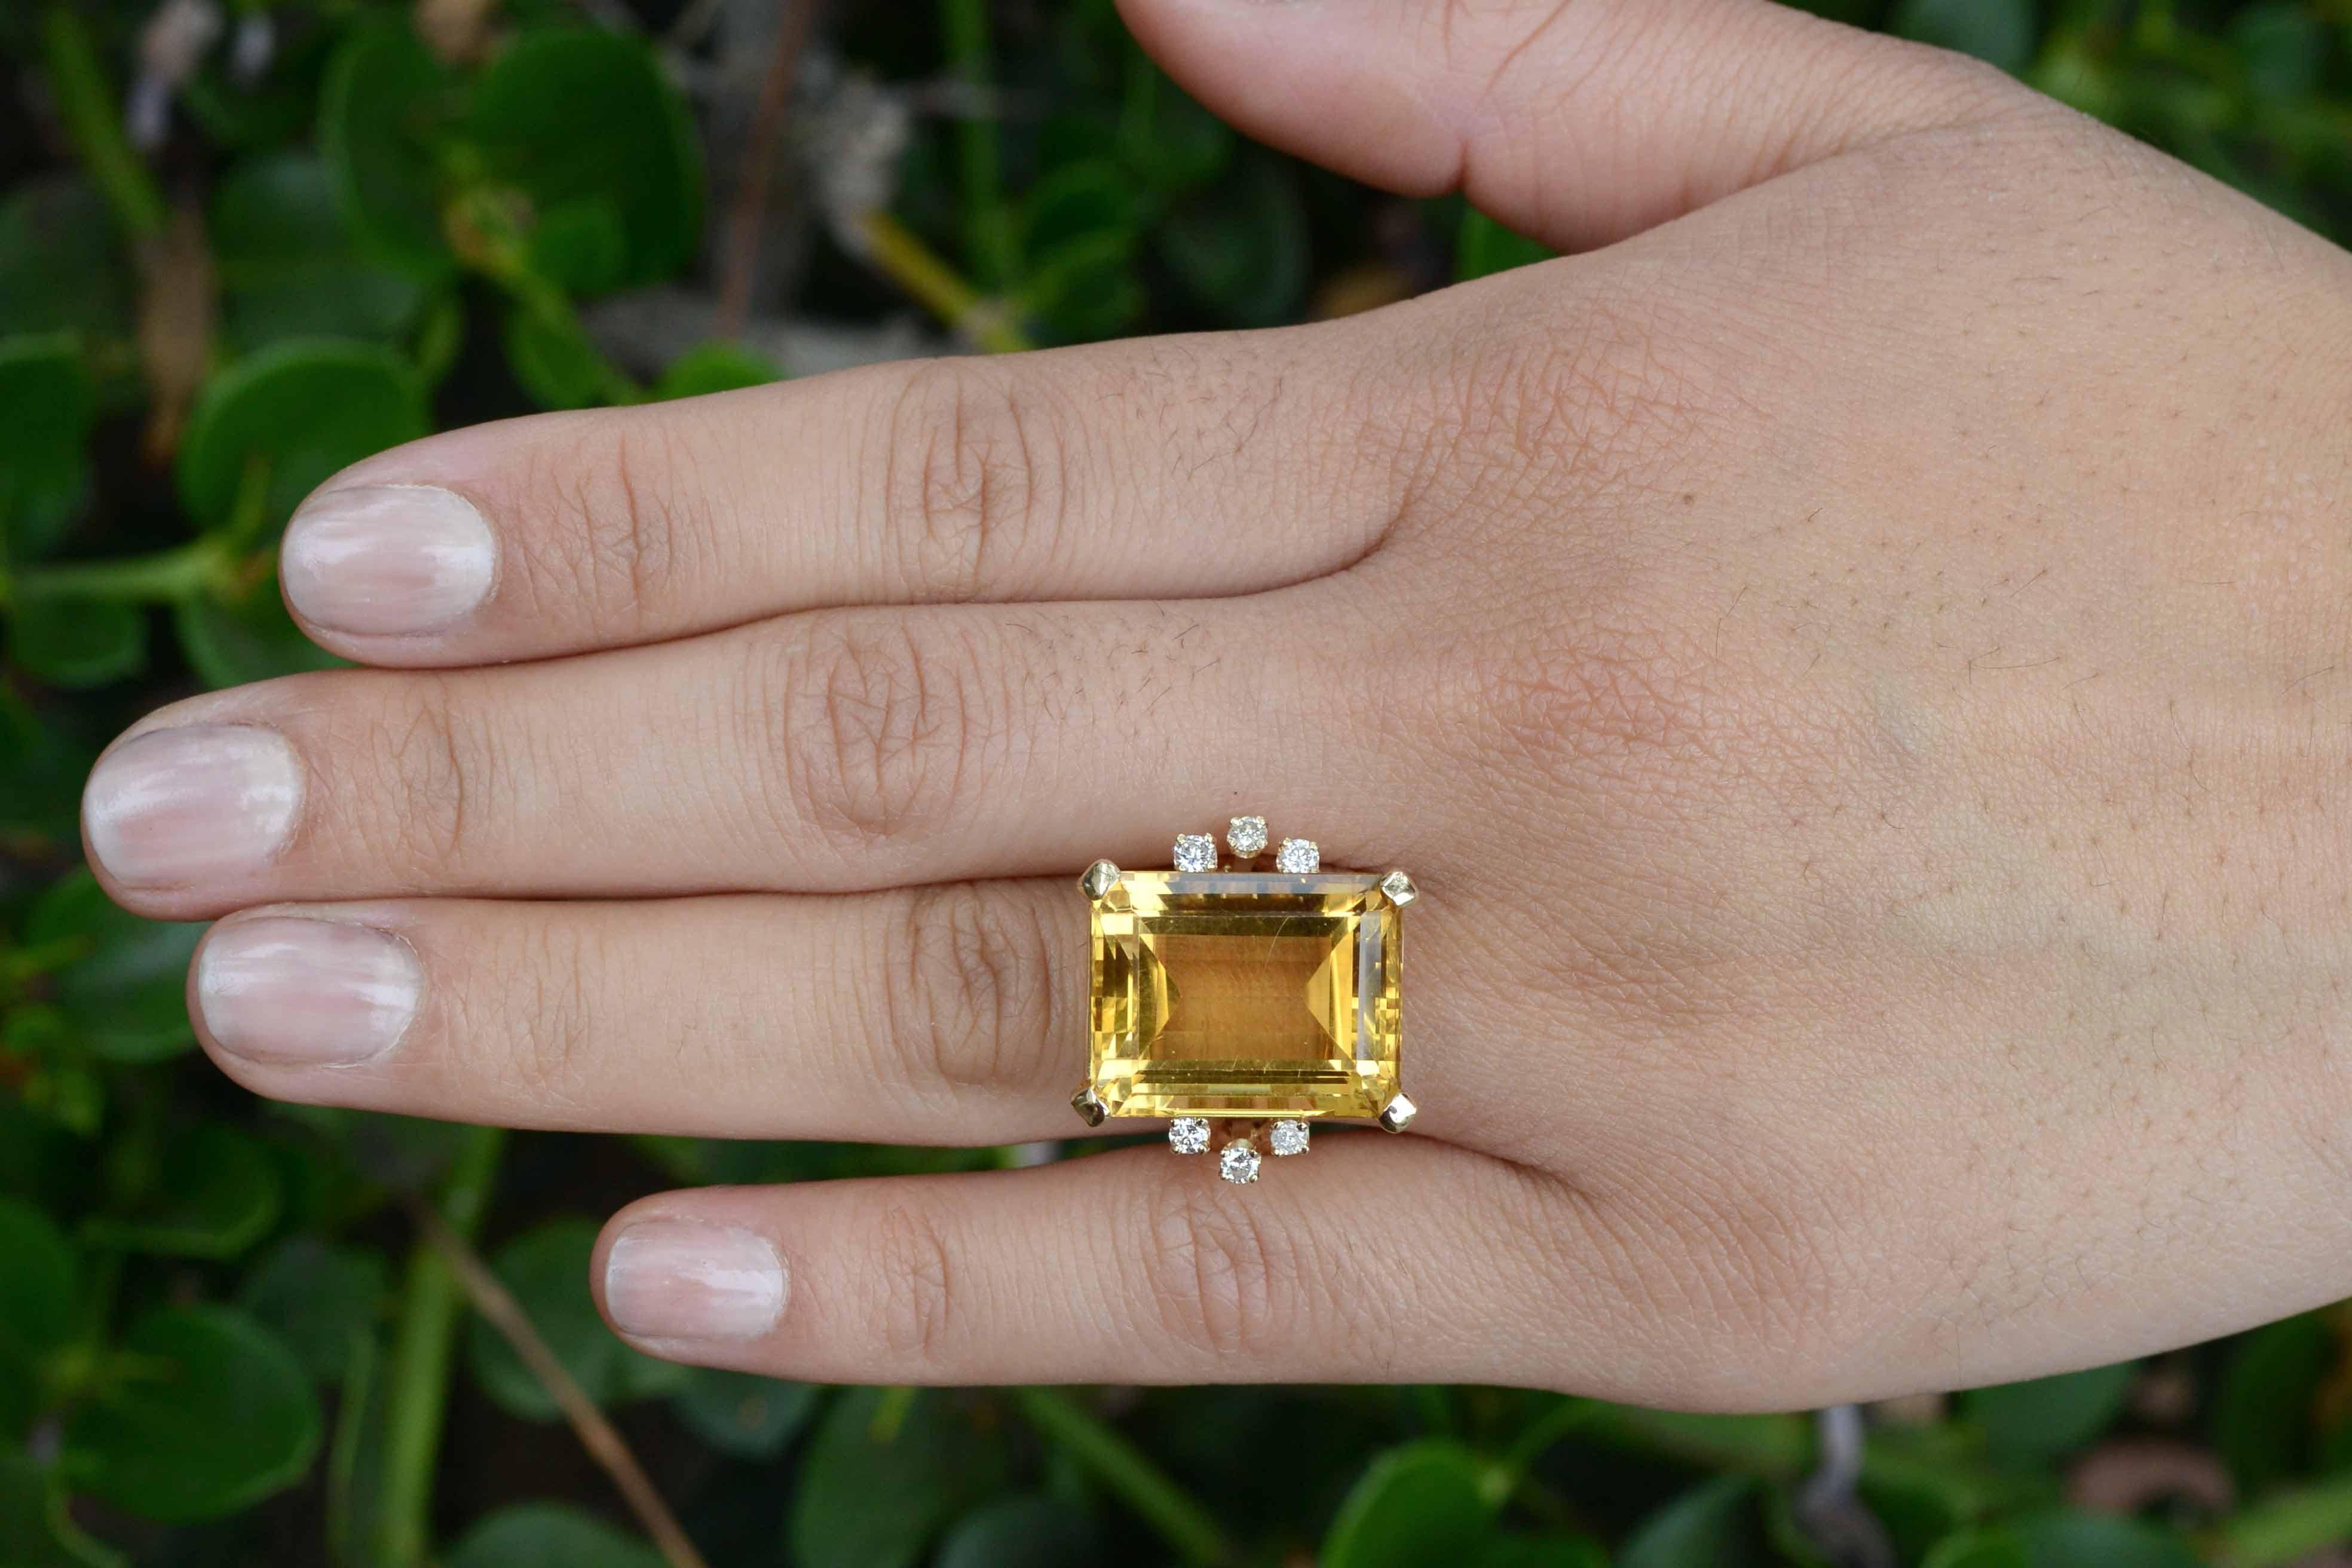 Centered by a rare, juicy and colossal 19+ carat golden-yellow natural citrine, this original, vintage 1940s Retro cocktail ring makes a bold statement. Regally perched atop a weighty yellow gold cathedral setting and accented by 6 sparkly diamonds.